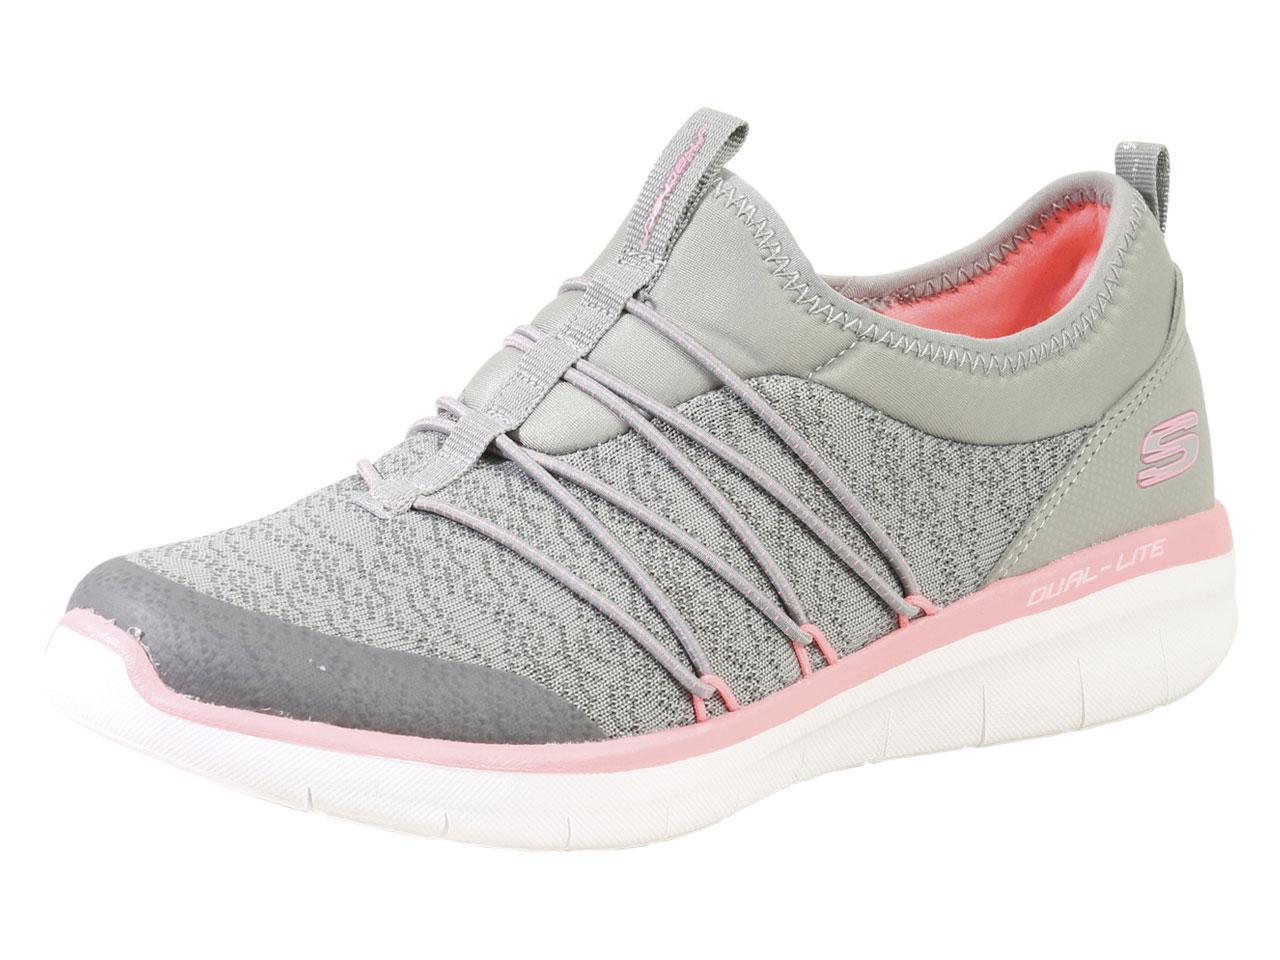 Skechers Women's Synergy 2.0 Simply Chic Memory Foam Sneakers Shoes - Gray/Pink - 8.5 B(M) US